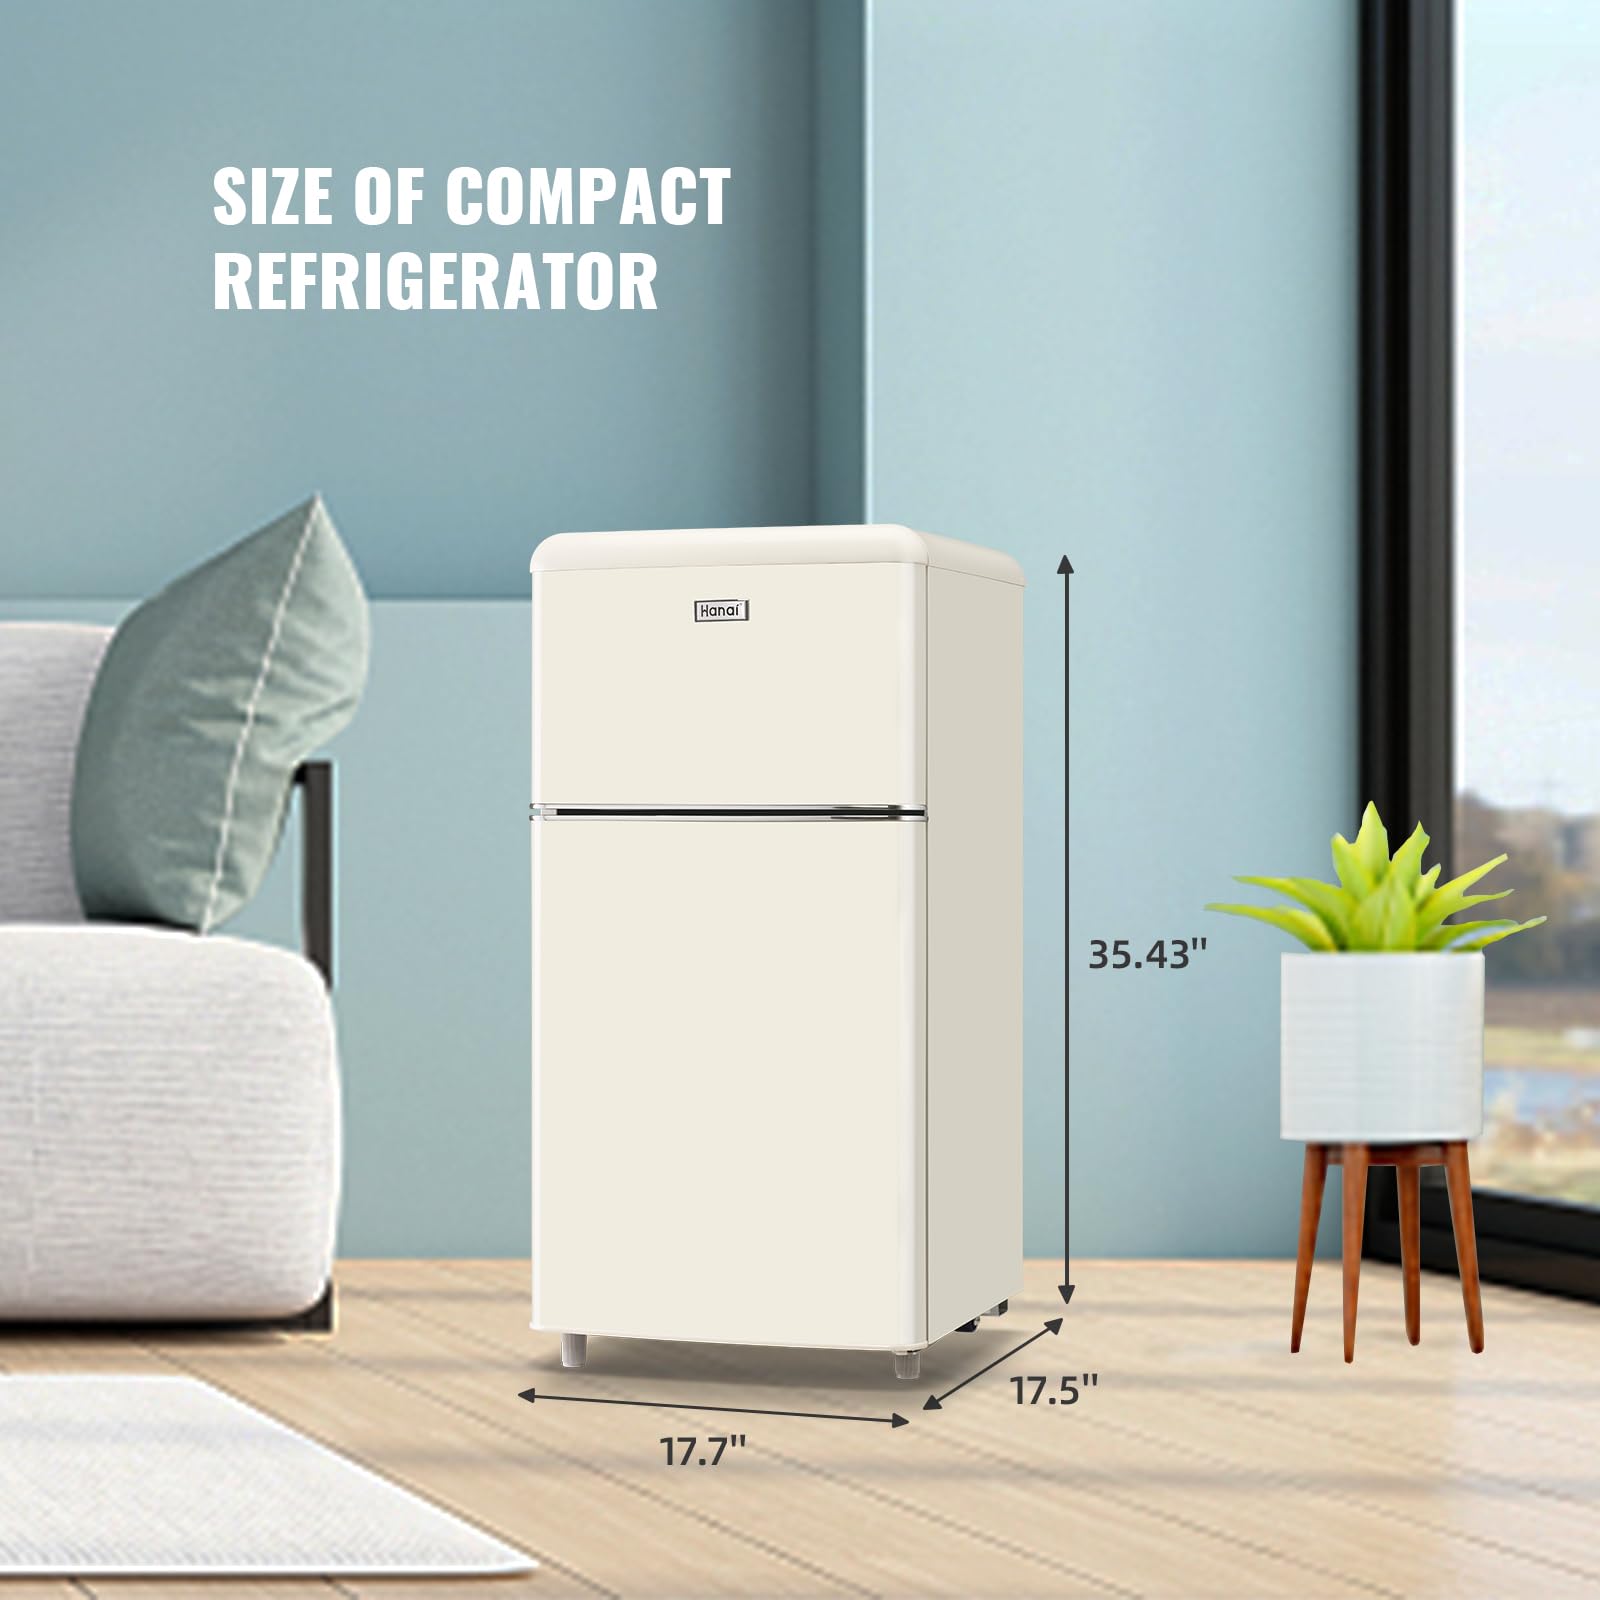 WANAI Compact Mini Refrigerator 3.5 Cu.Ft Small Refrigerator with Freezer, Retro Mini Fridge with Dual Door,7 Adjustable Thermostat, Adjustable Shelves For Dorm, Office Bedroom,White